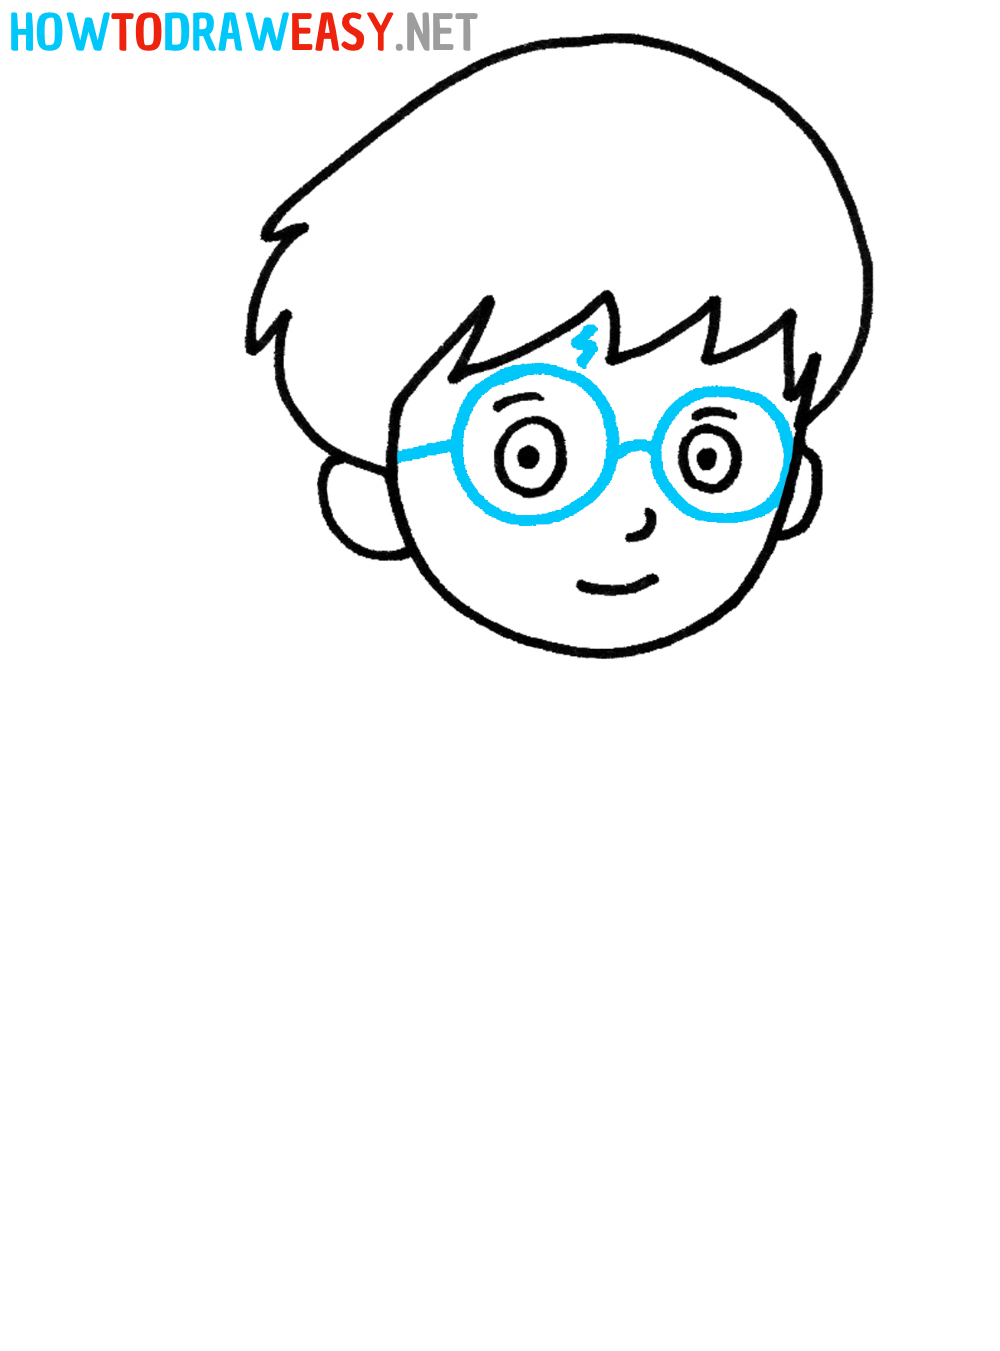 How to Draw Harry Potter Glasses